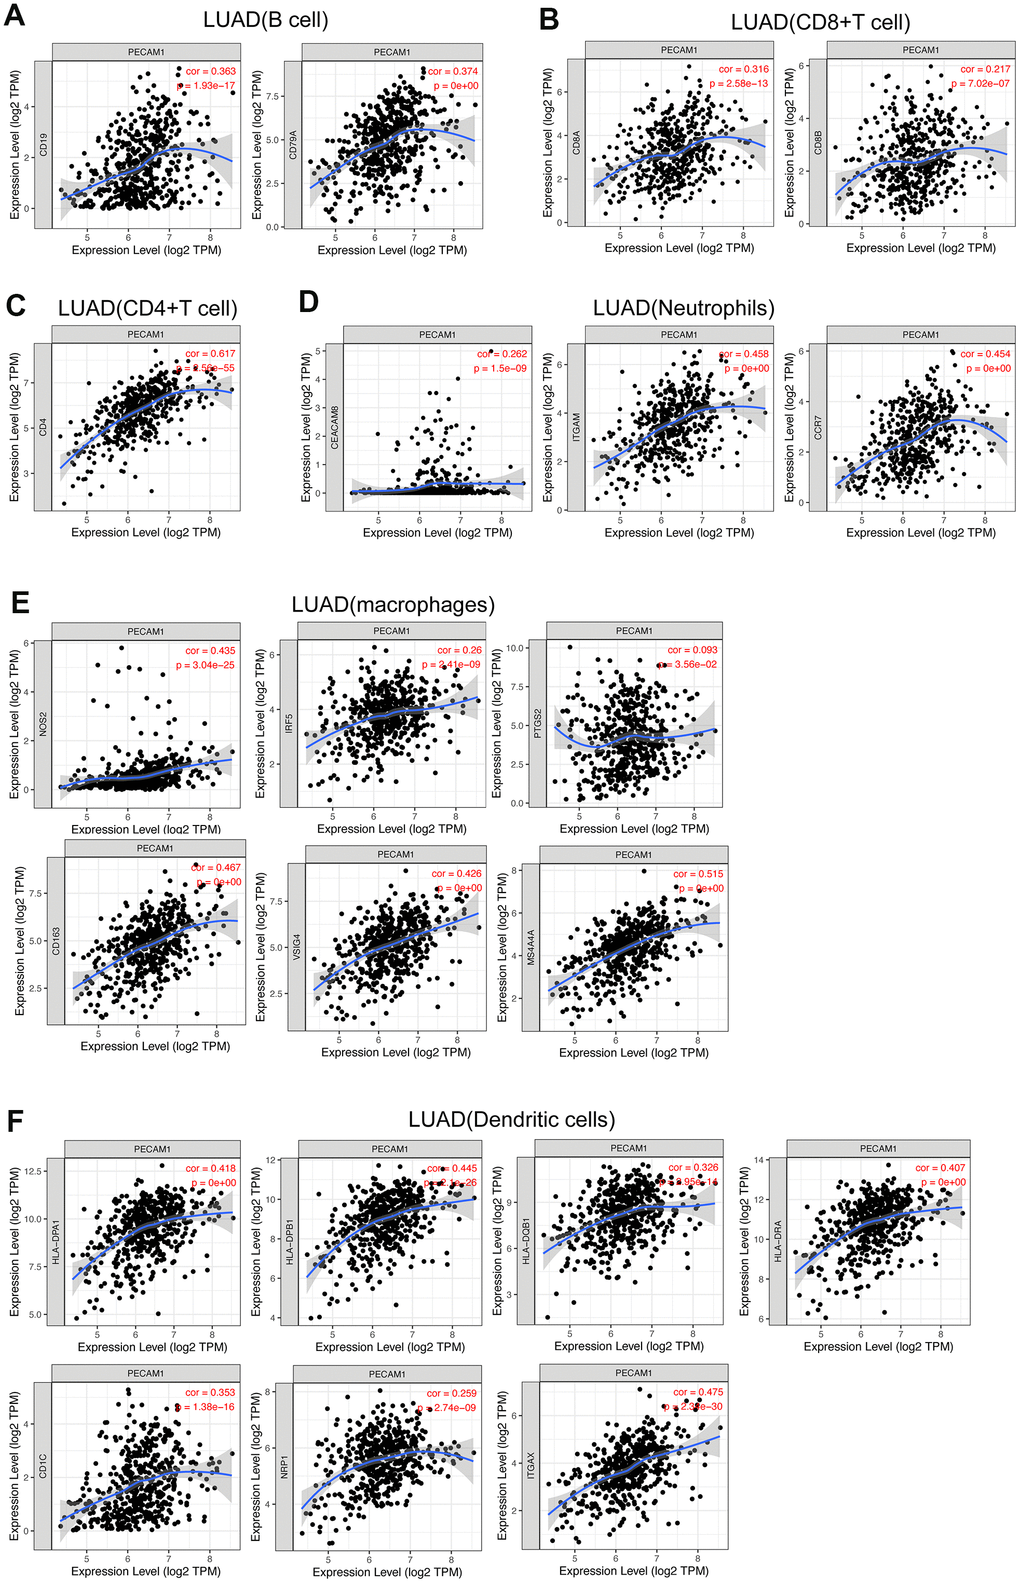 Correlation of PECAM1 expression with gene markers of tumor-infiltrating immune cells in LUAD. (A) Correlation with gene markers of B cells in LUAD. (B) Correlation with gene markers of CD8+ T cells in LUAD. (C) Correlation with gene markers of CD4+ T cells in LUAD. (D) Correlation with gene markers of neutrophils in LUAD. (E) Correlation with gene markers of macrophages in LUAD. (F) Correlation with gene markers of DCs in LUAD.